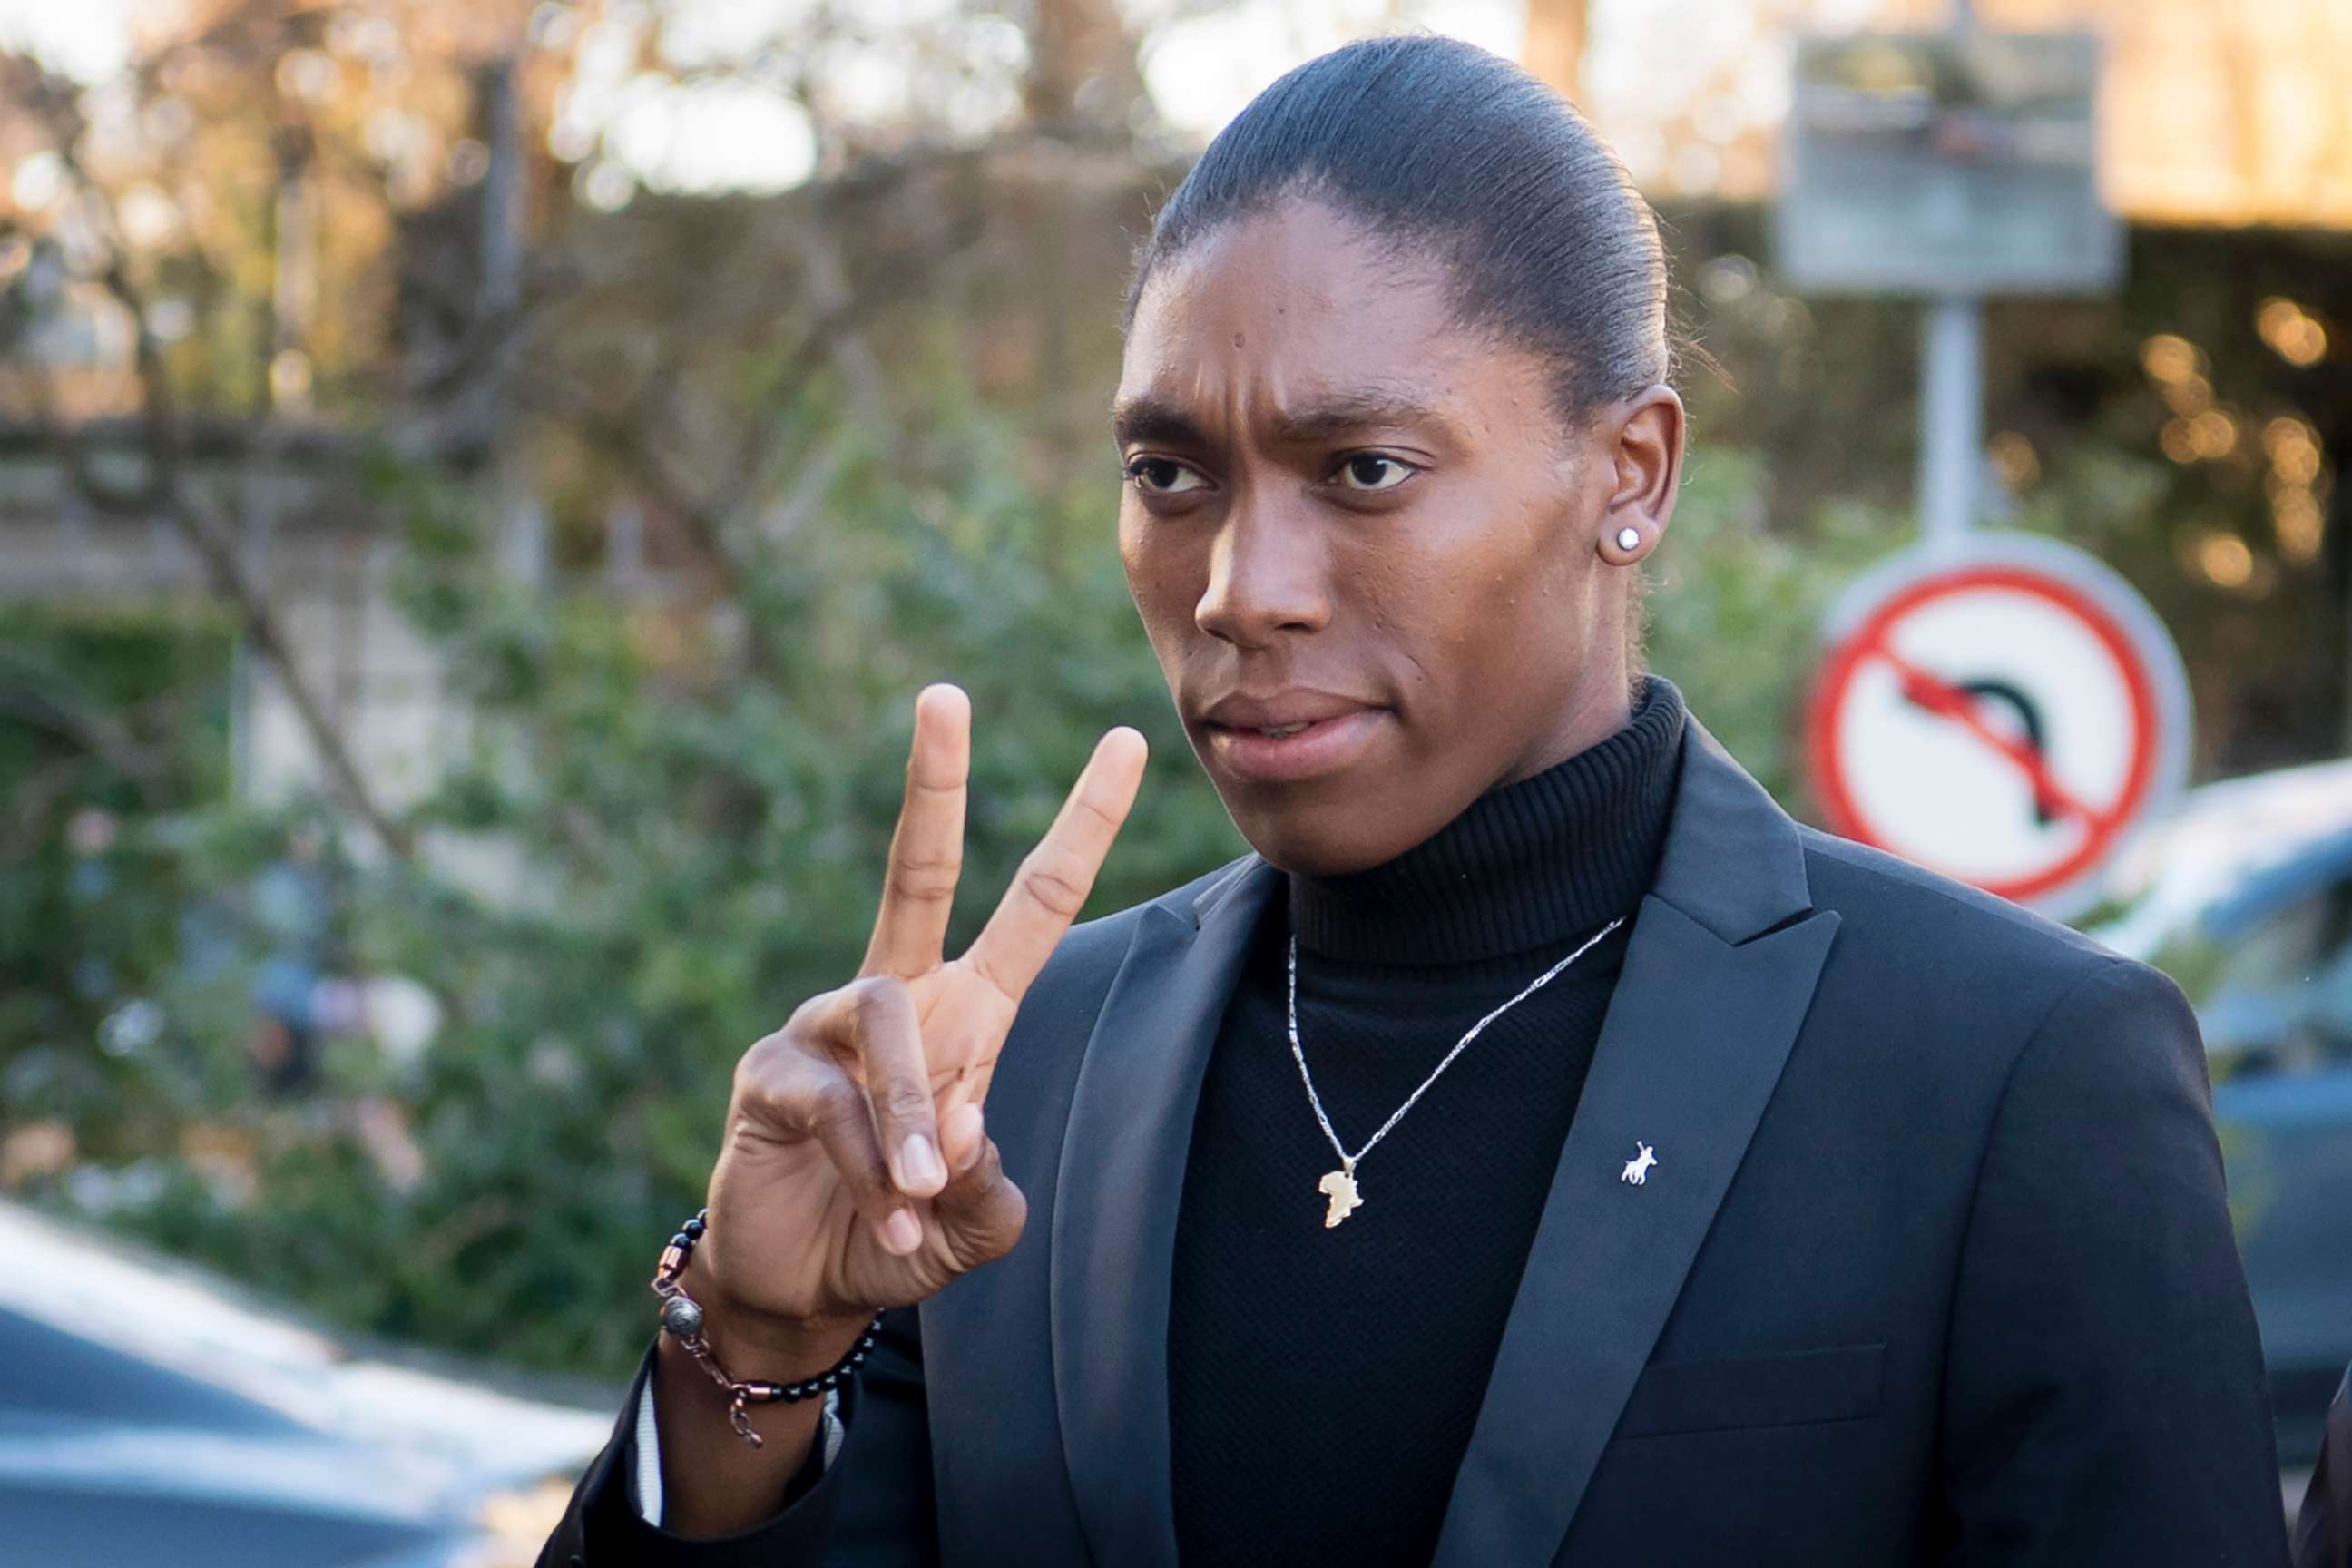 PHOTO: South Africa's runner Caster Semenya, current 800-meter Olympic gold medalist and world champion, arrives for the first day of her hearing at the international Court of Arbitration for Sport, CAS, in Lausanne, Switzerland, Feb. 18, 2019.